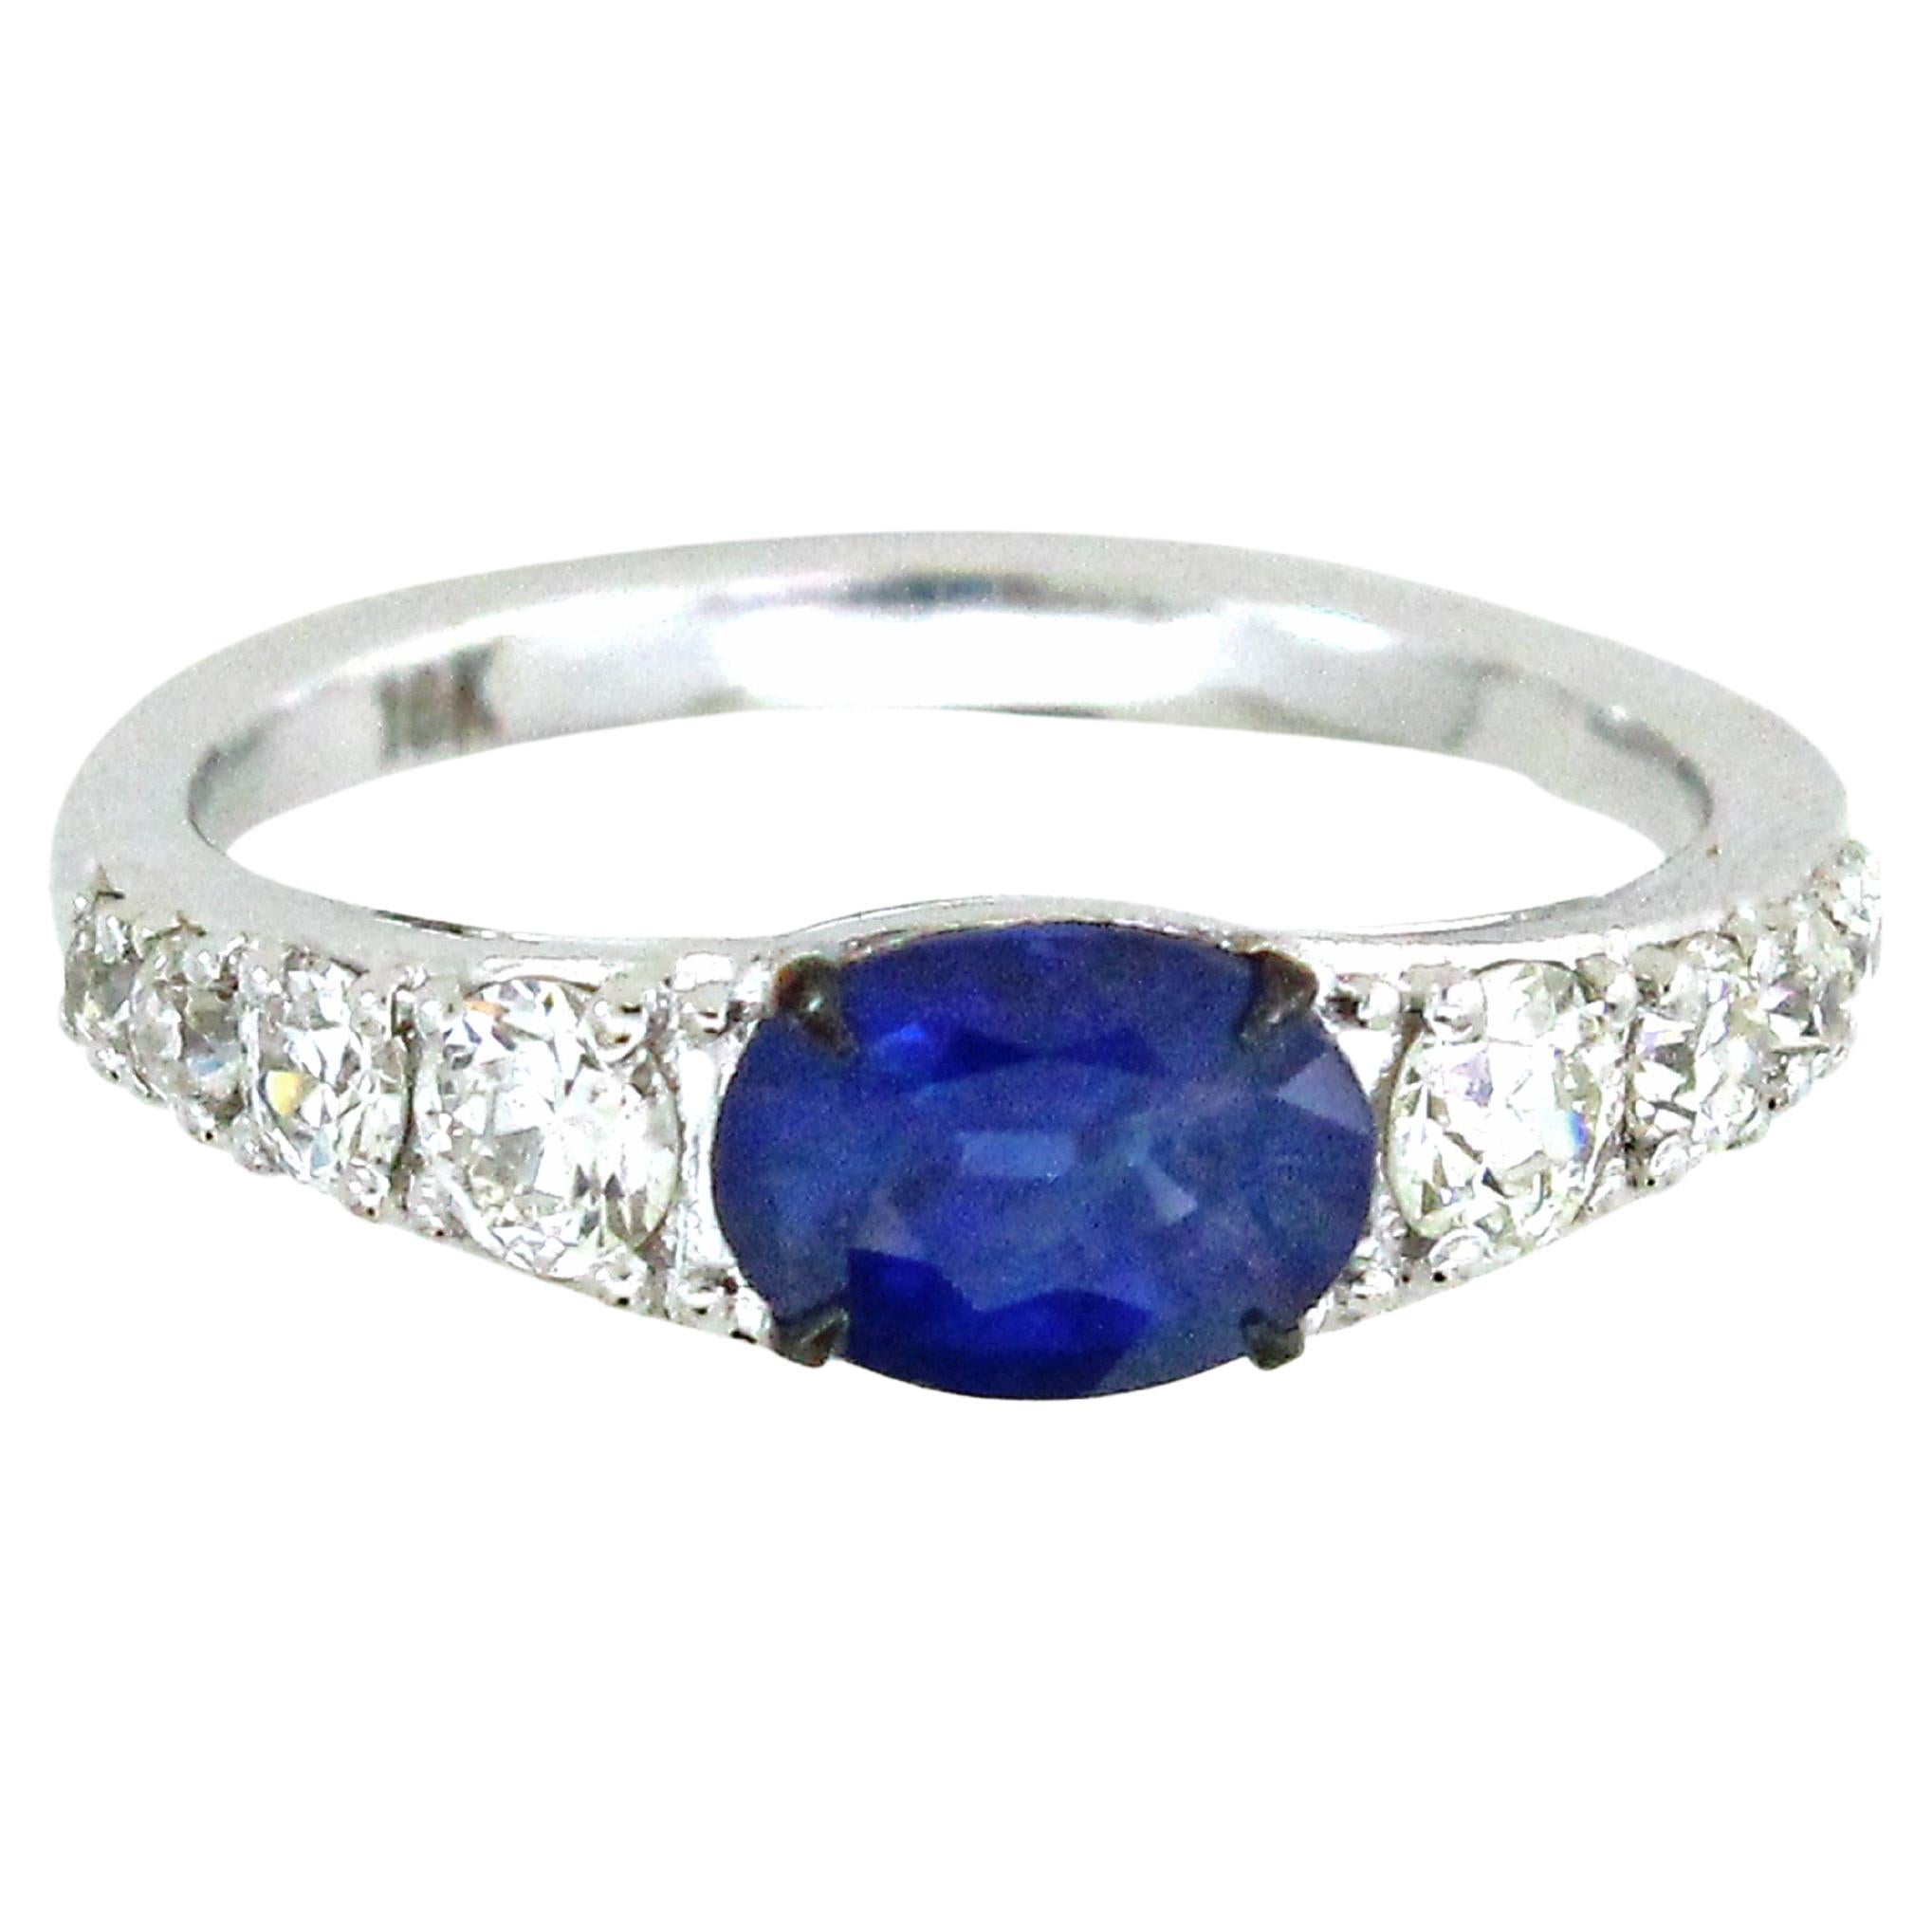 1.24 cts Sapphire Ring set along with old mine cut diamonds For Sale